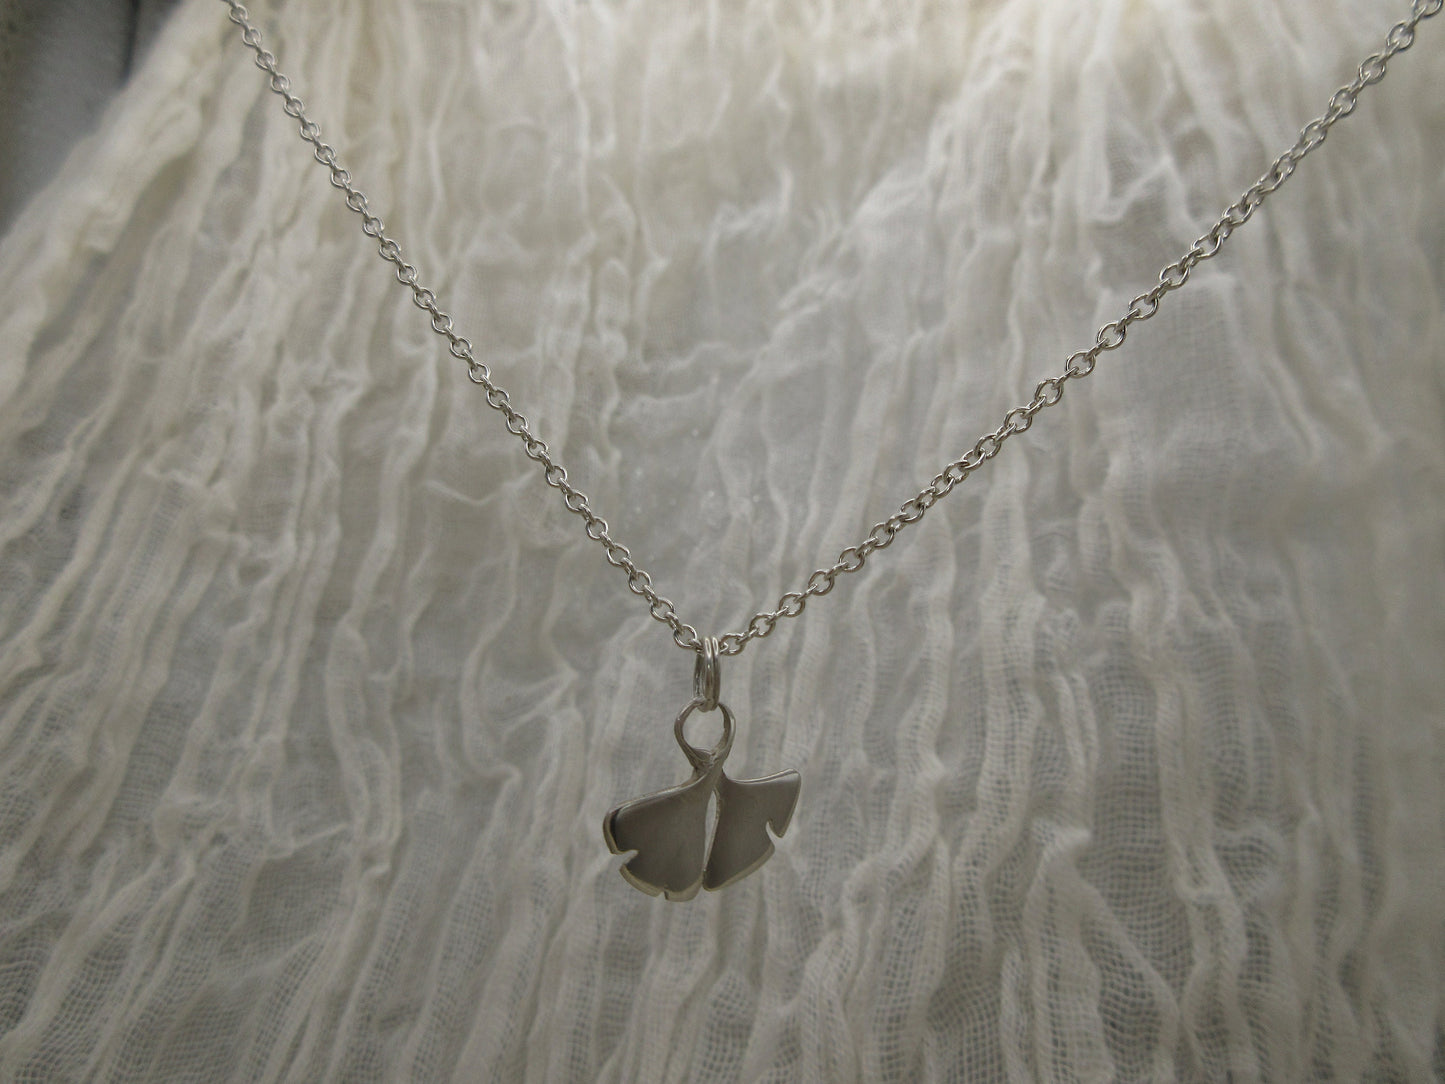 Double ginkgo leaf pendant in argentium sterling silver